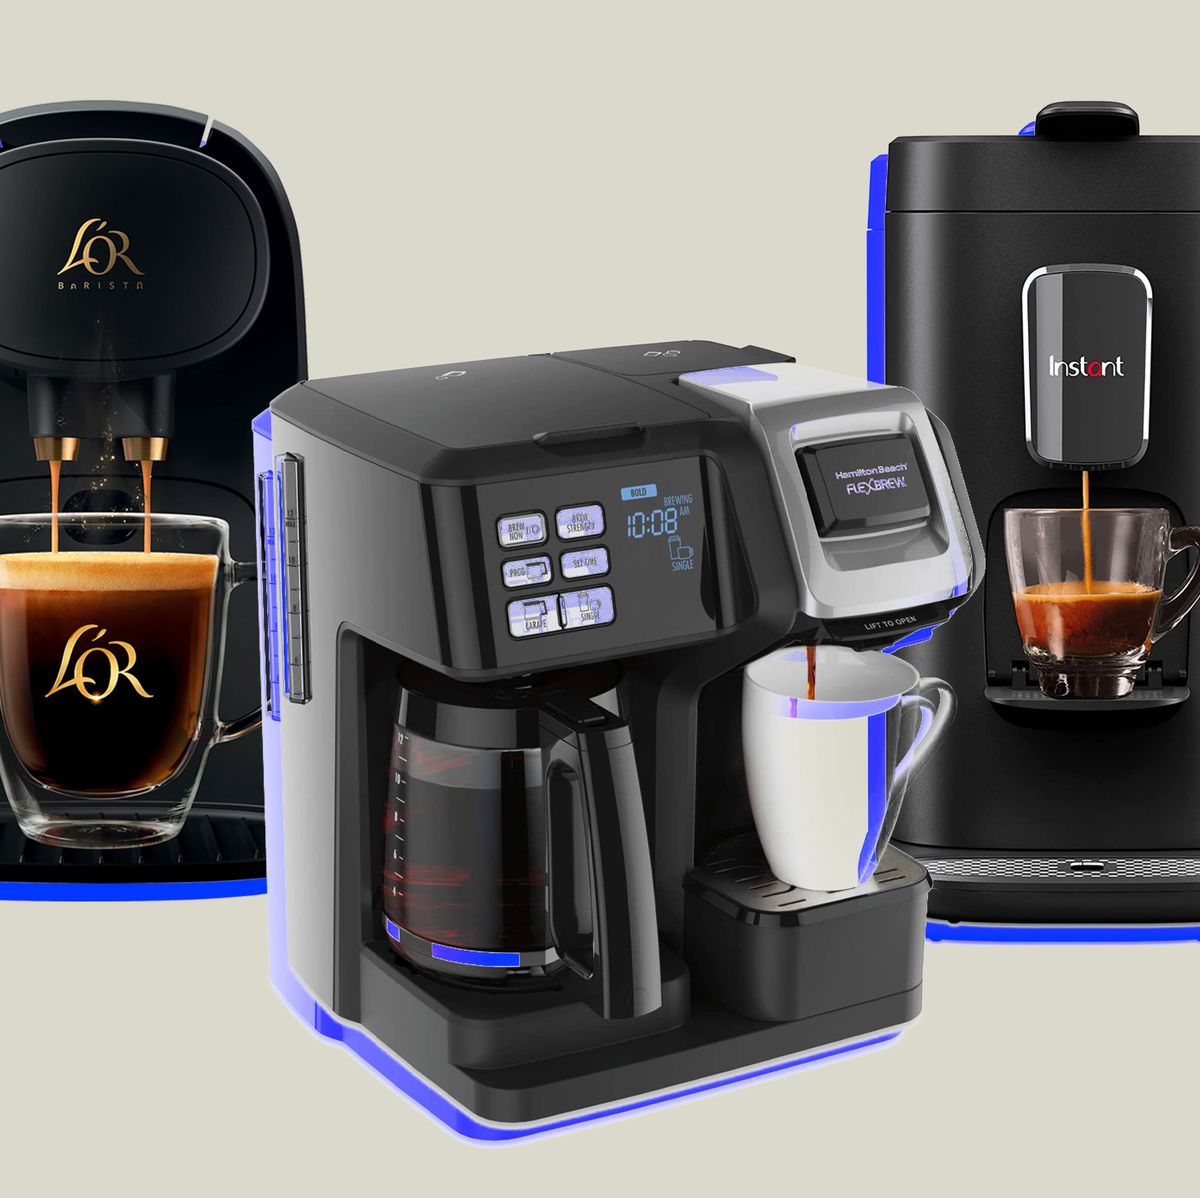  3-in-1 Coffee Maker for Nespresso, K-Cup Pod and